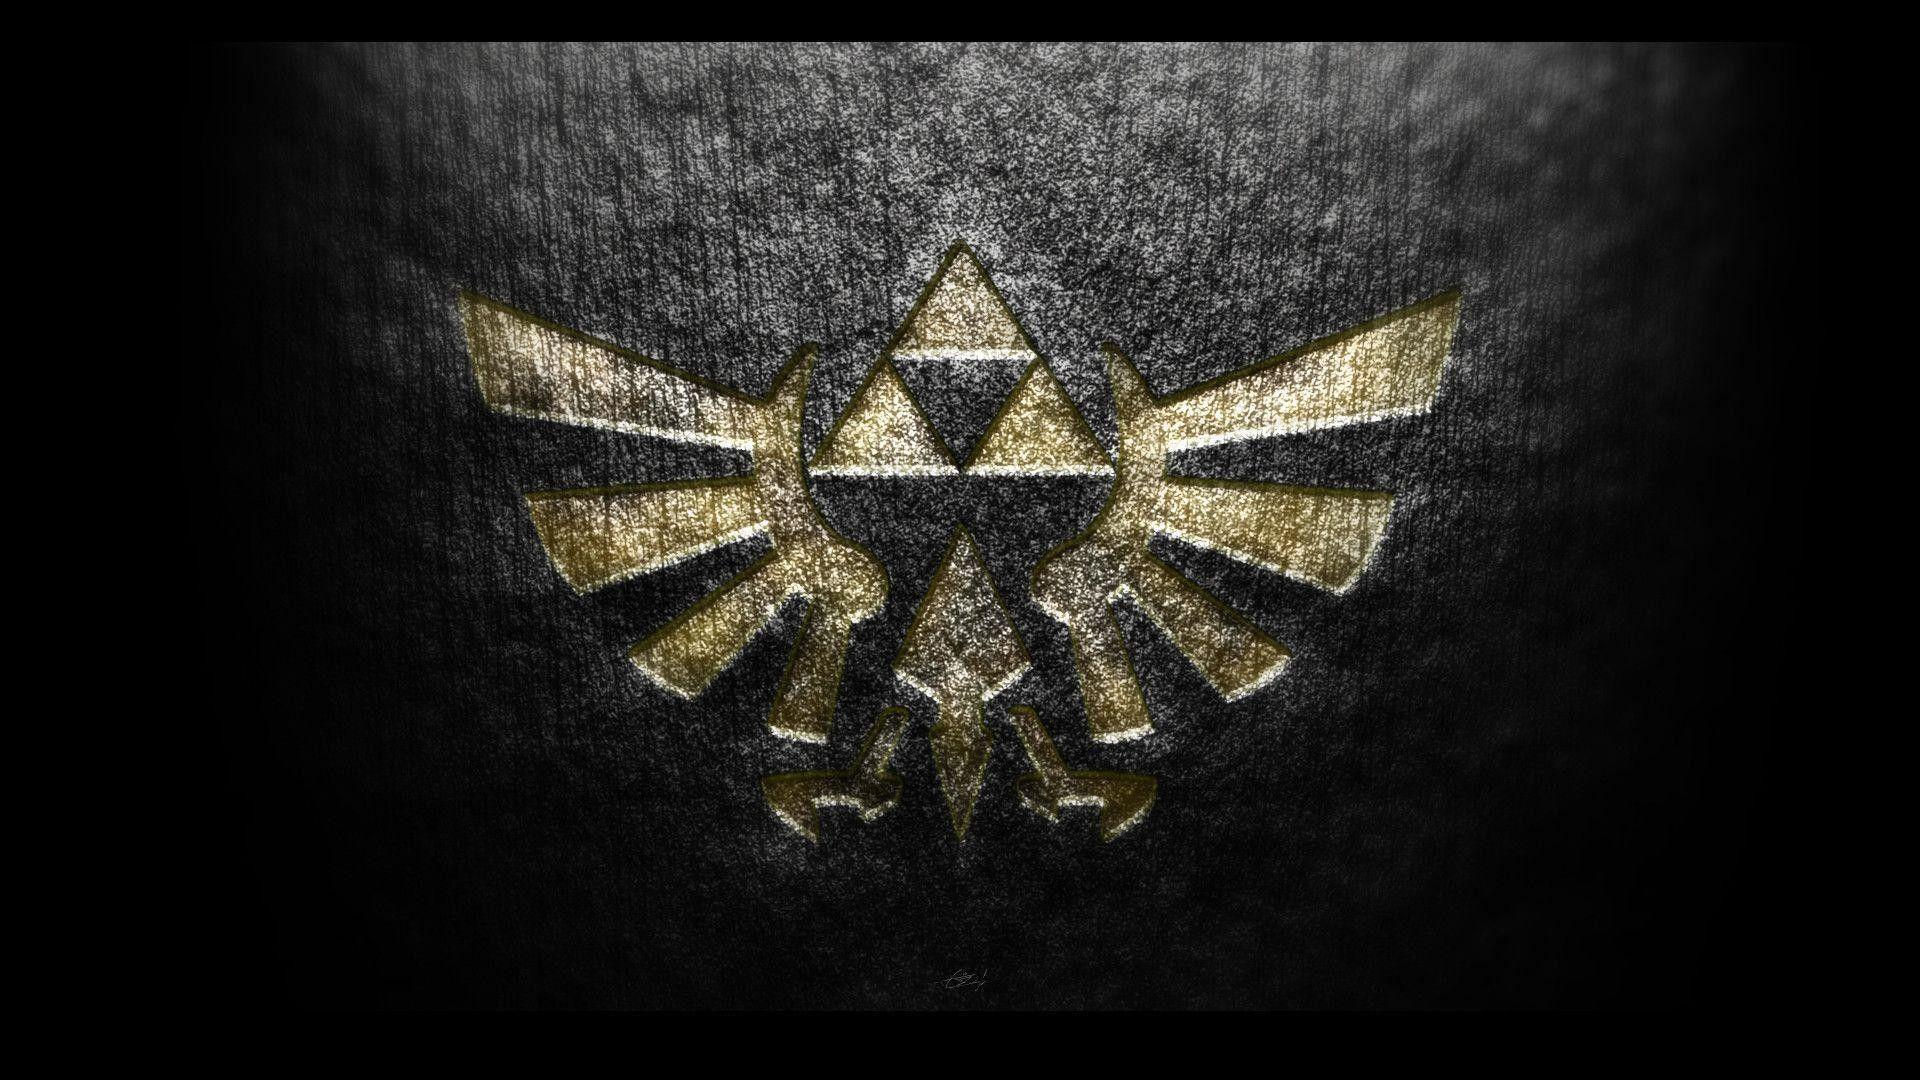 Wallpaper ID 556432  design internet video games social networking  The Legend of Zelda global communications cooperation geometric shape  Triforce nature technology free download